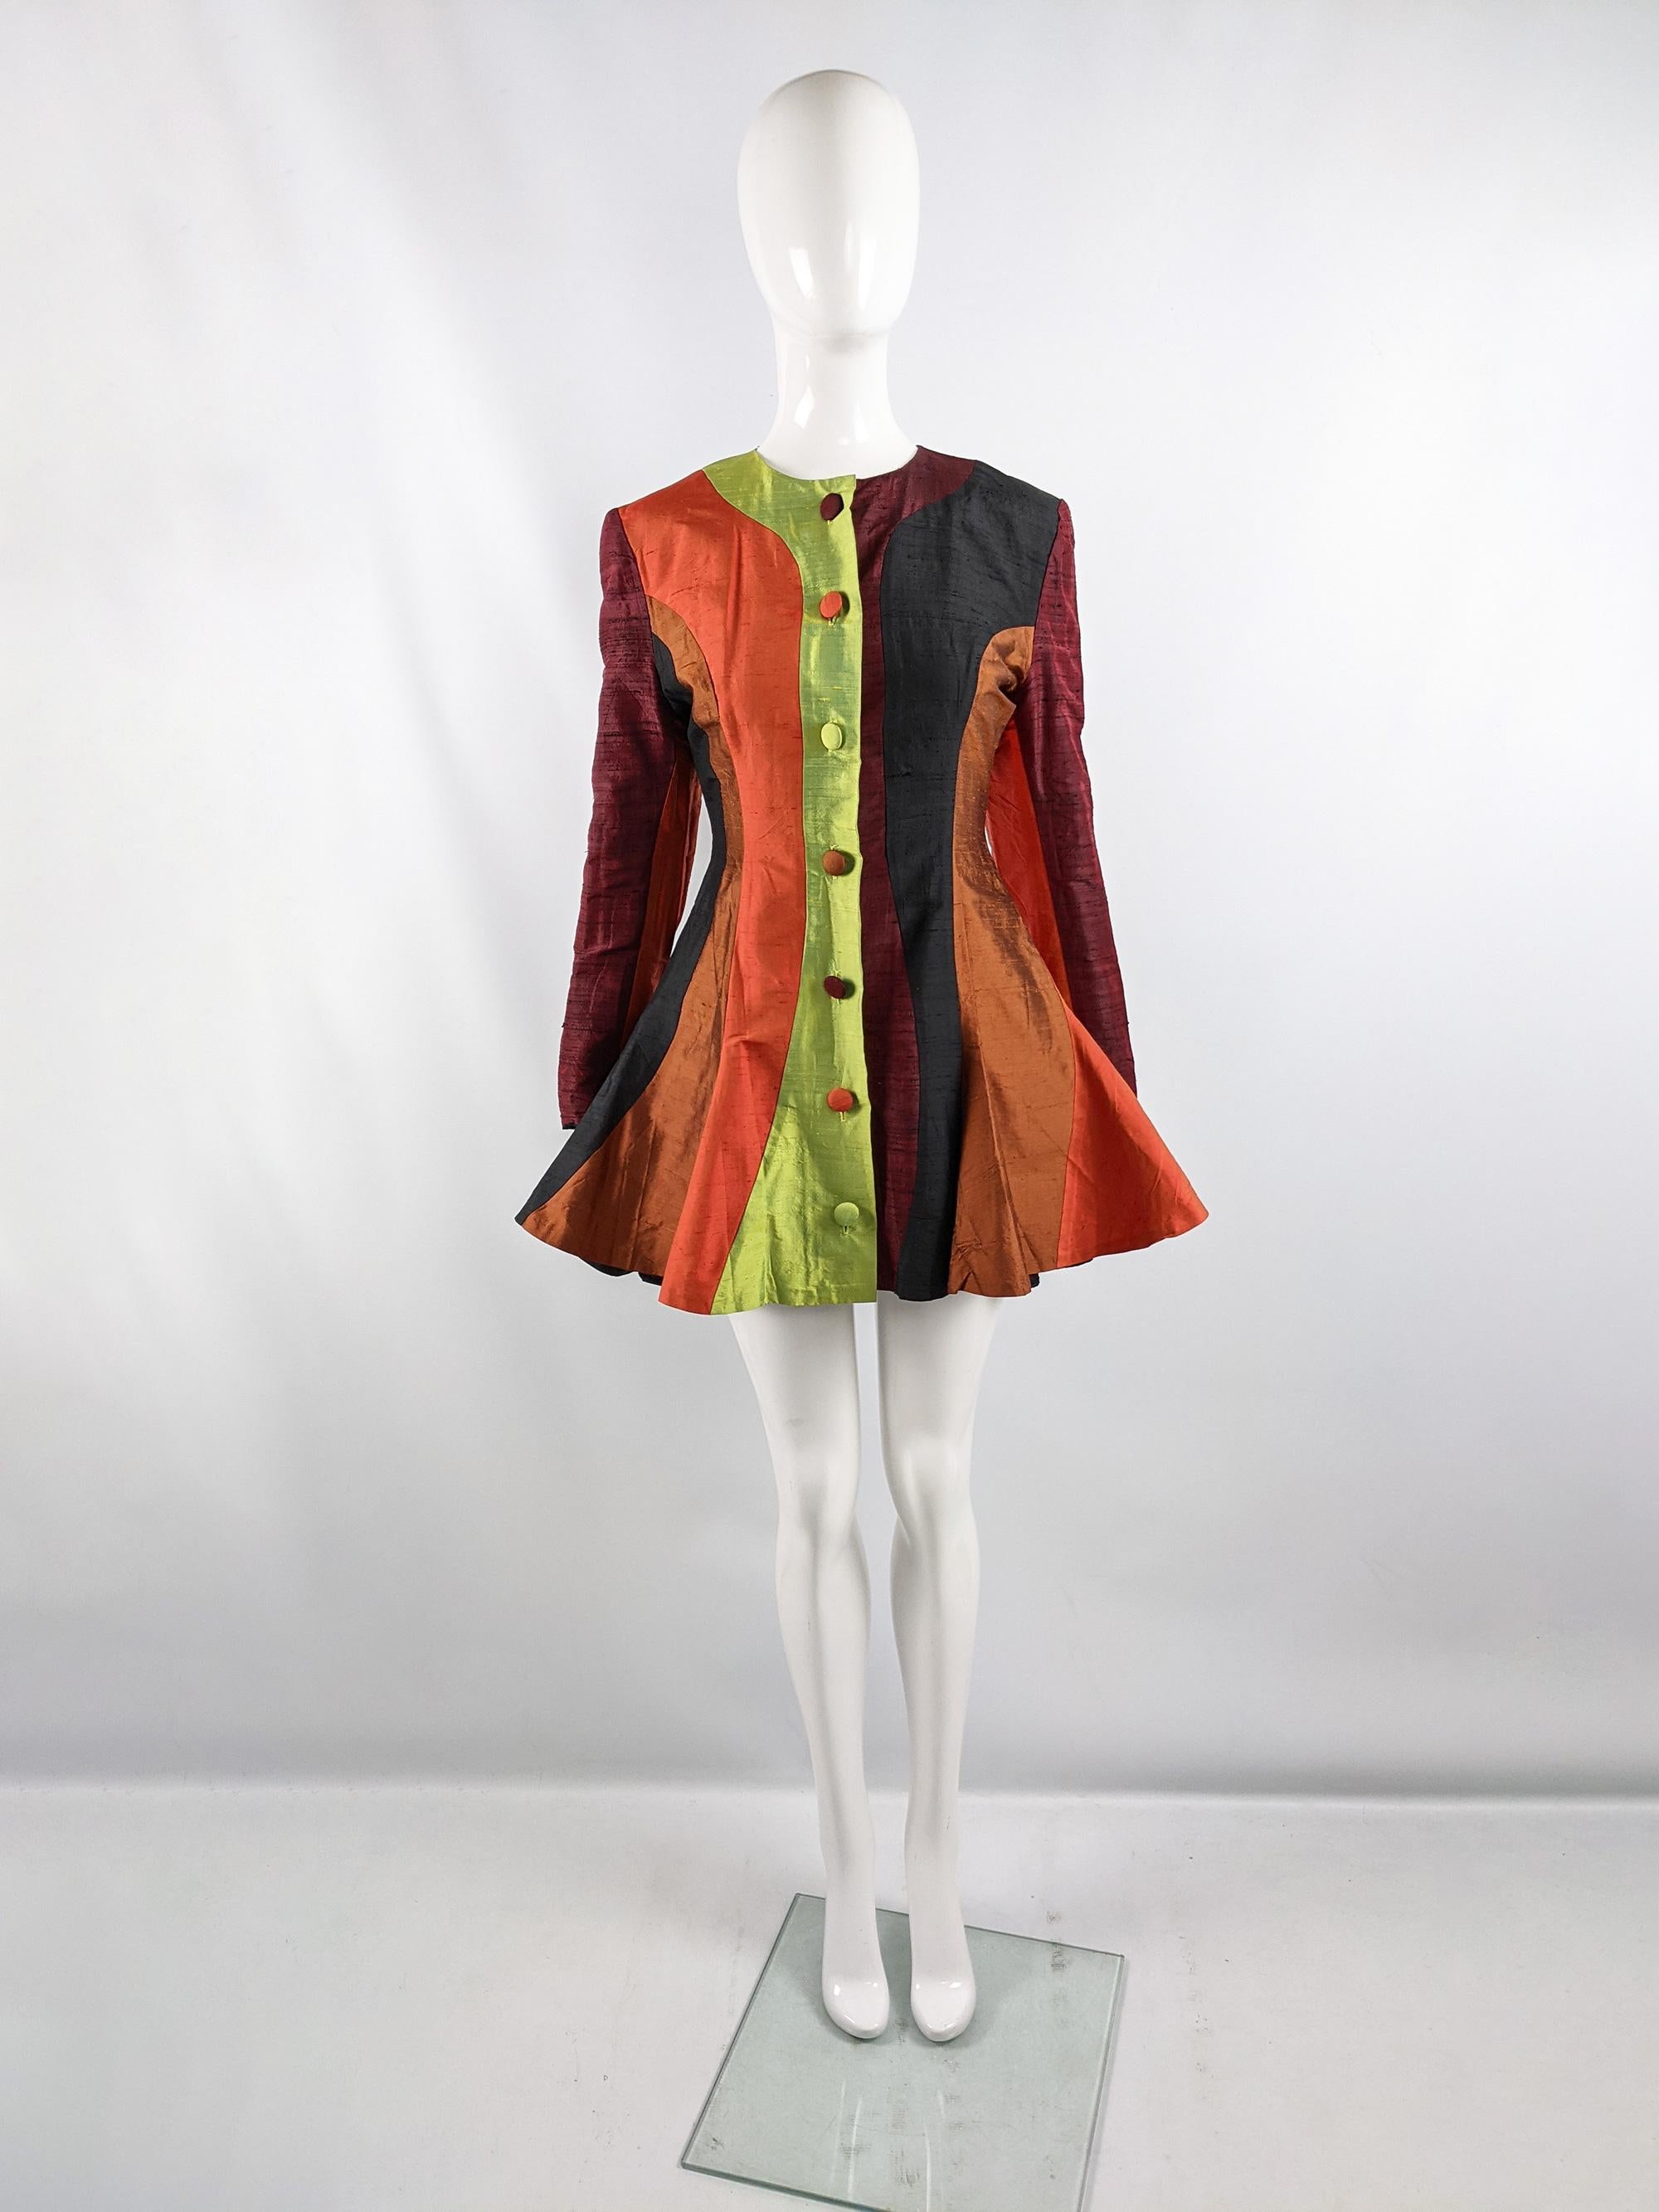 A fabulous vintage jacket from the Spring Summer 1992 collection by cult British fashion designer, Jacqueline Hancher known for her clubwear designs in the 80s and 90s alongside contemporaries like Pam Hogg and Katherine Hamnett. In a patchwork /